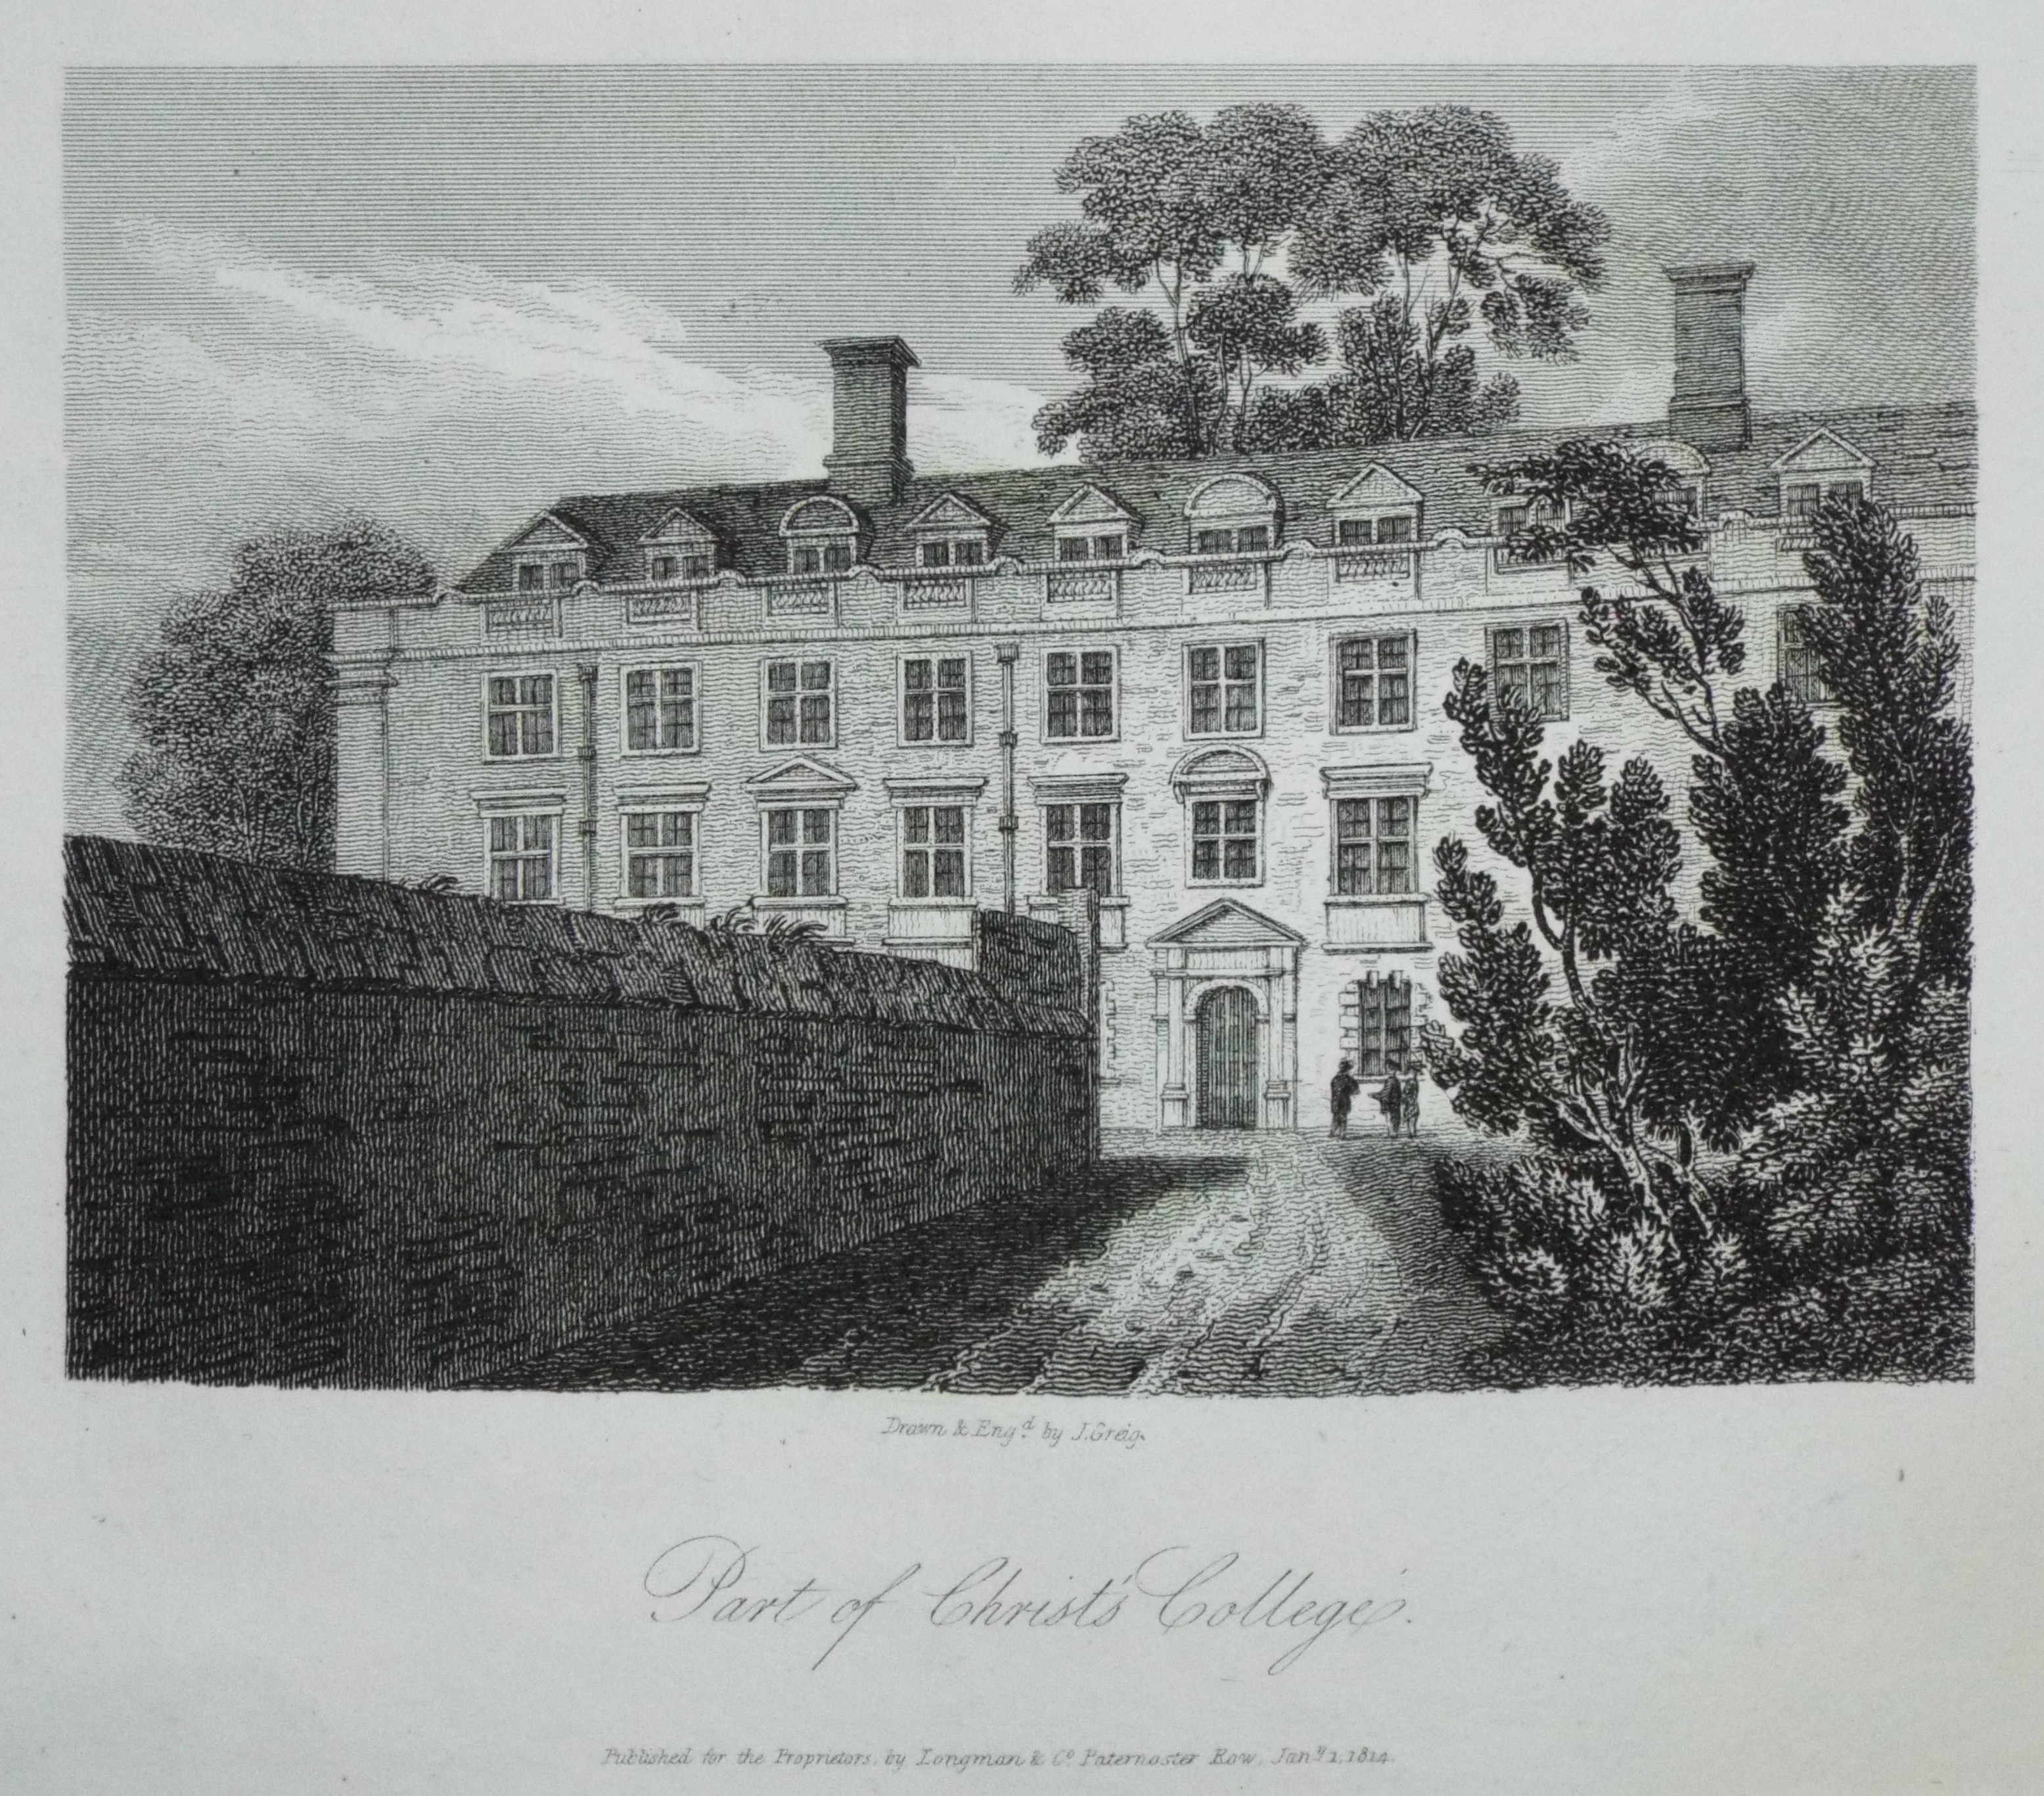 Print - Part of Christ's College. - Greig